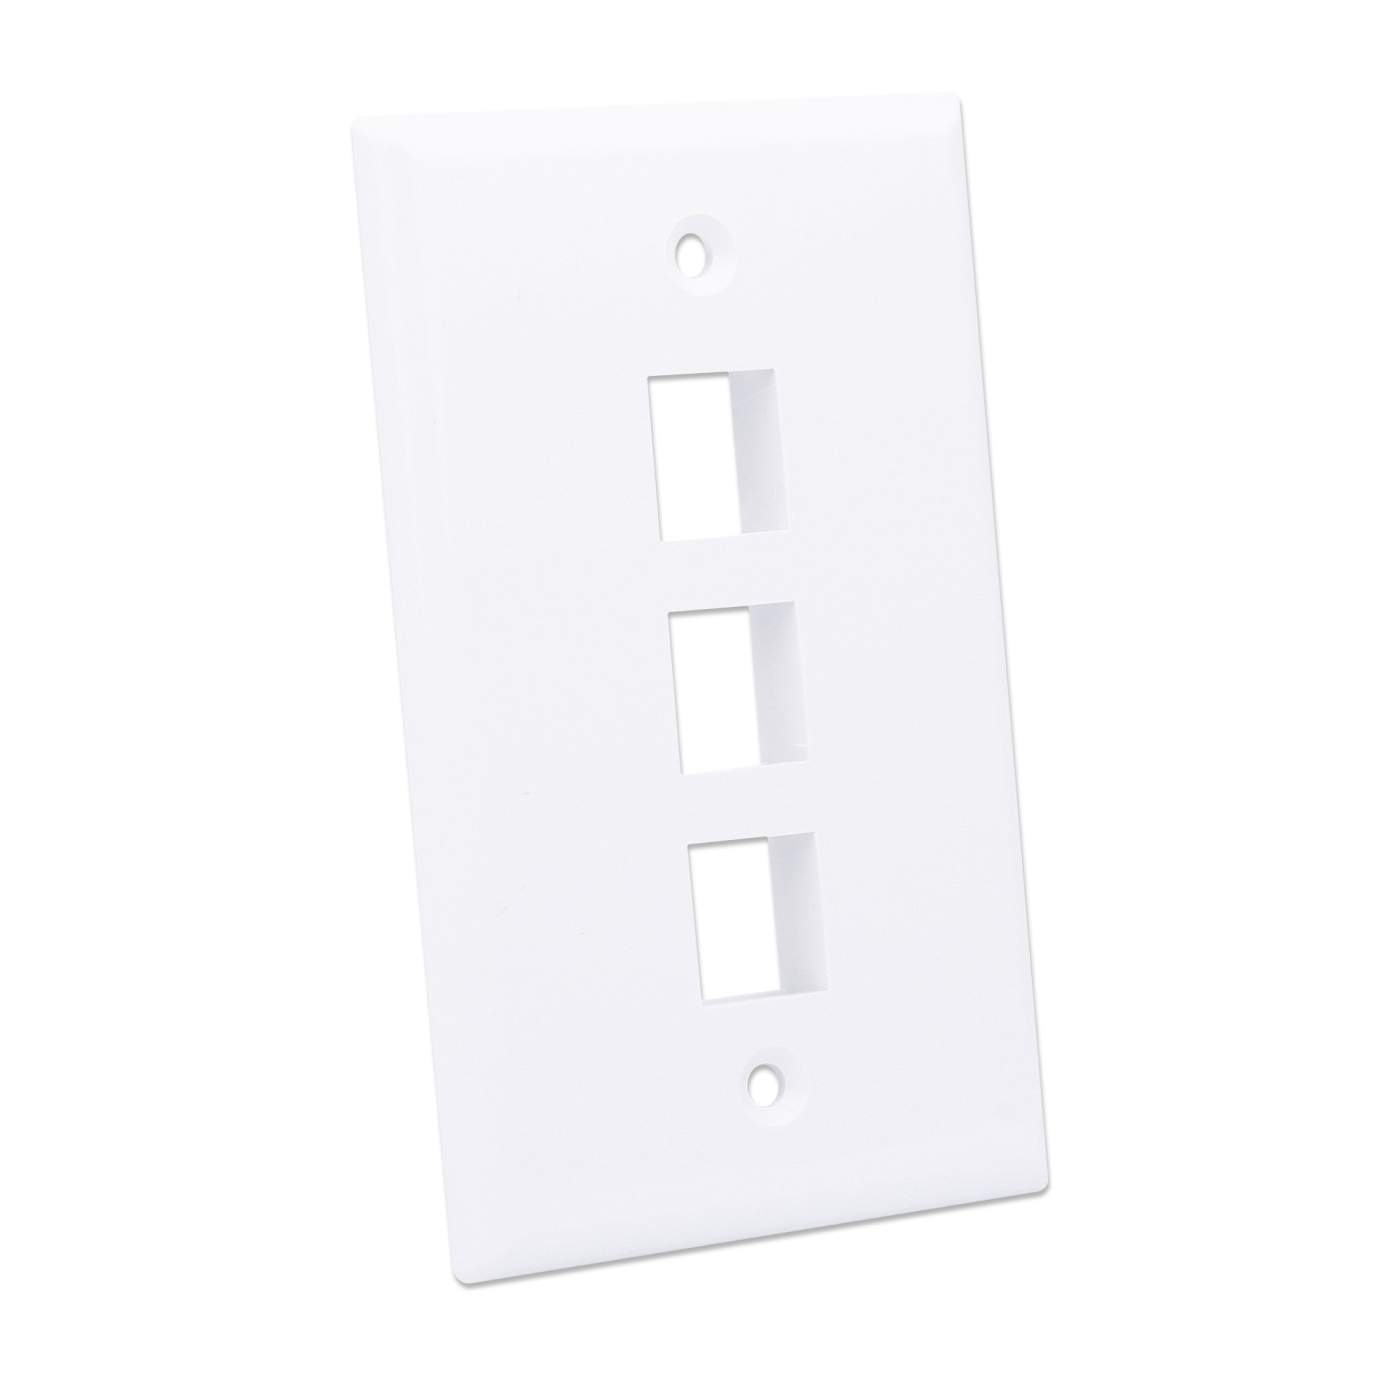 3-Outlet Keystone Wall Plate Image 3